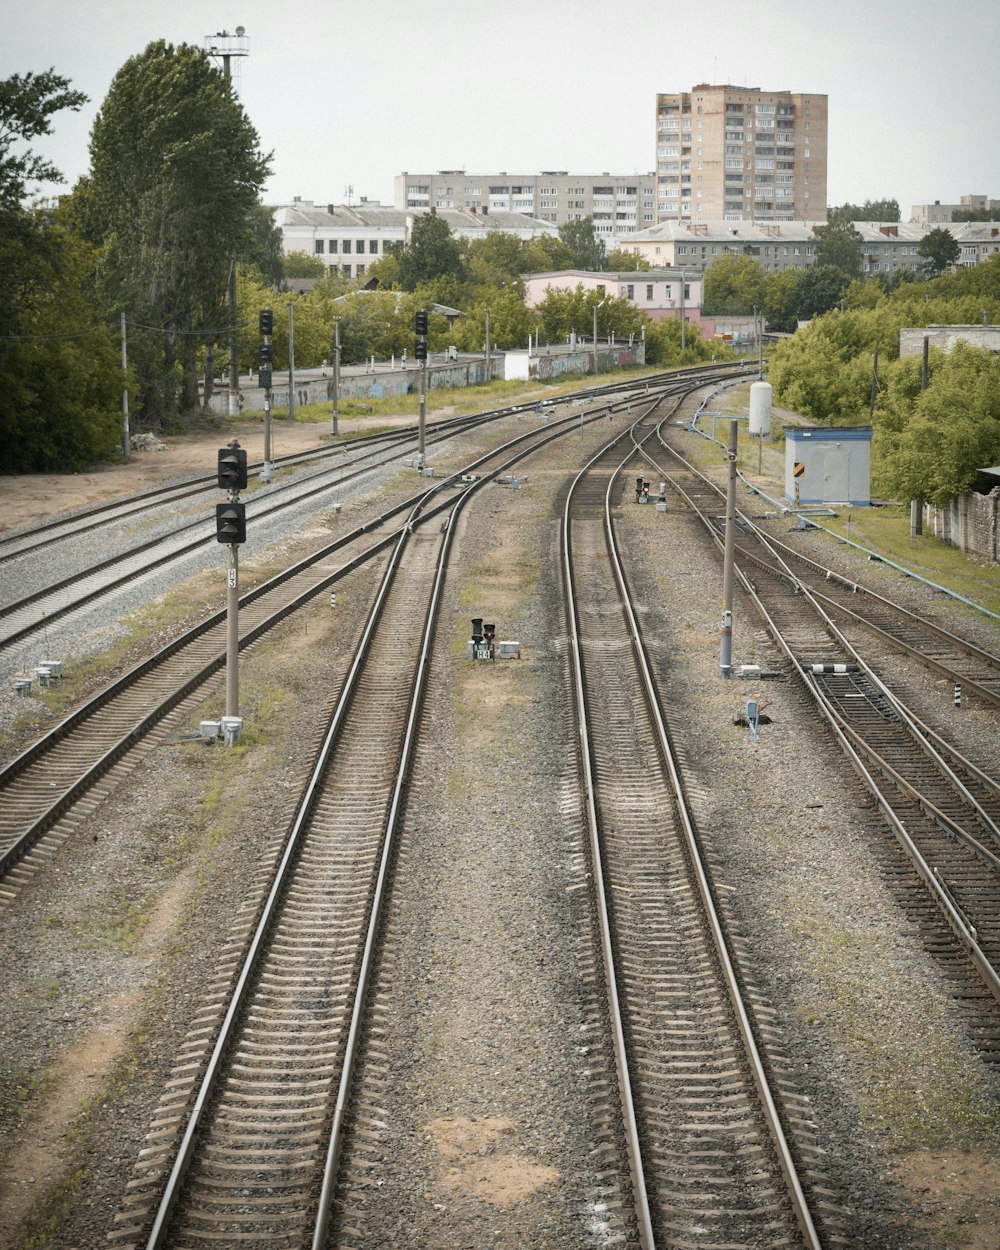 a view of a train track with buildings in the background